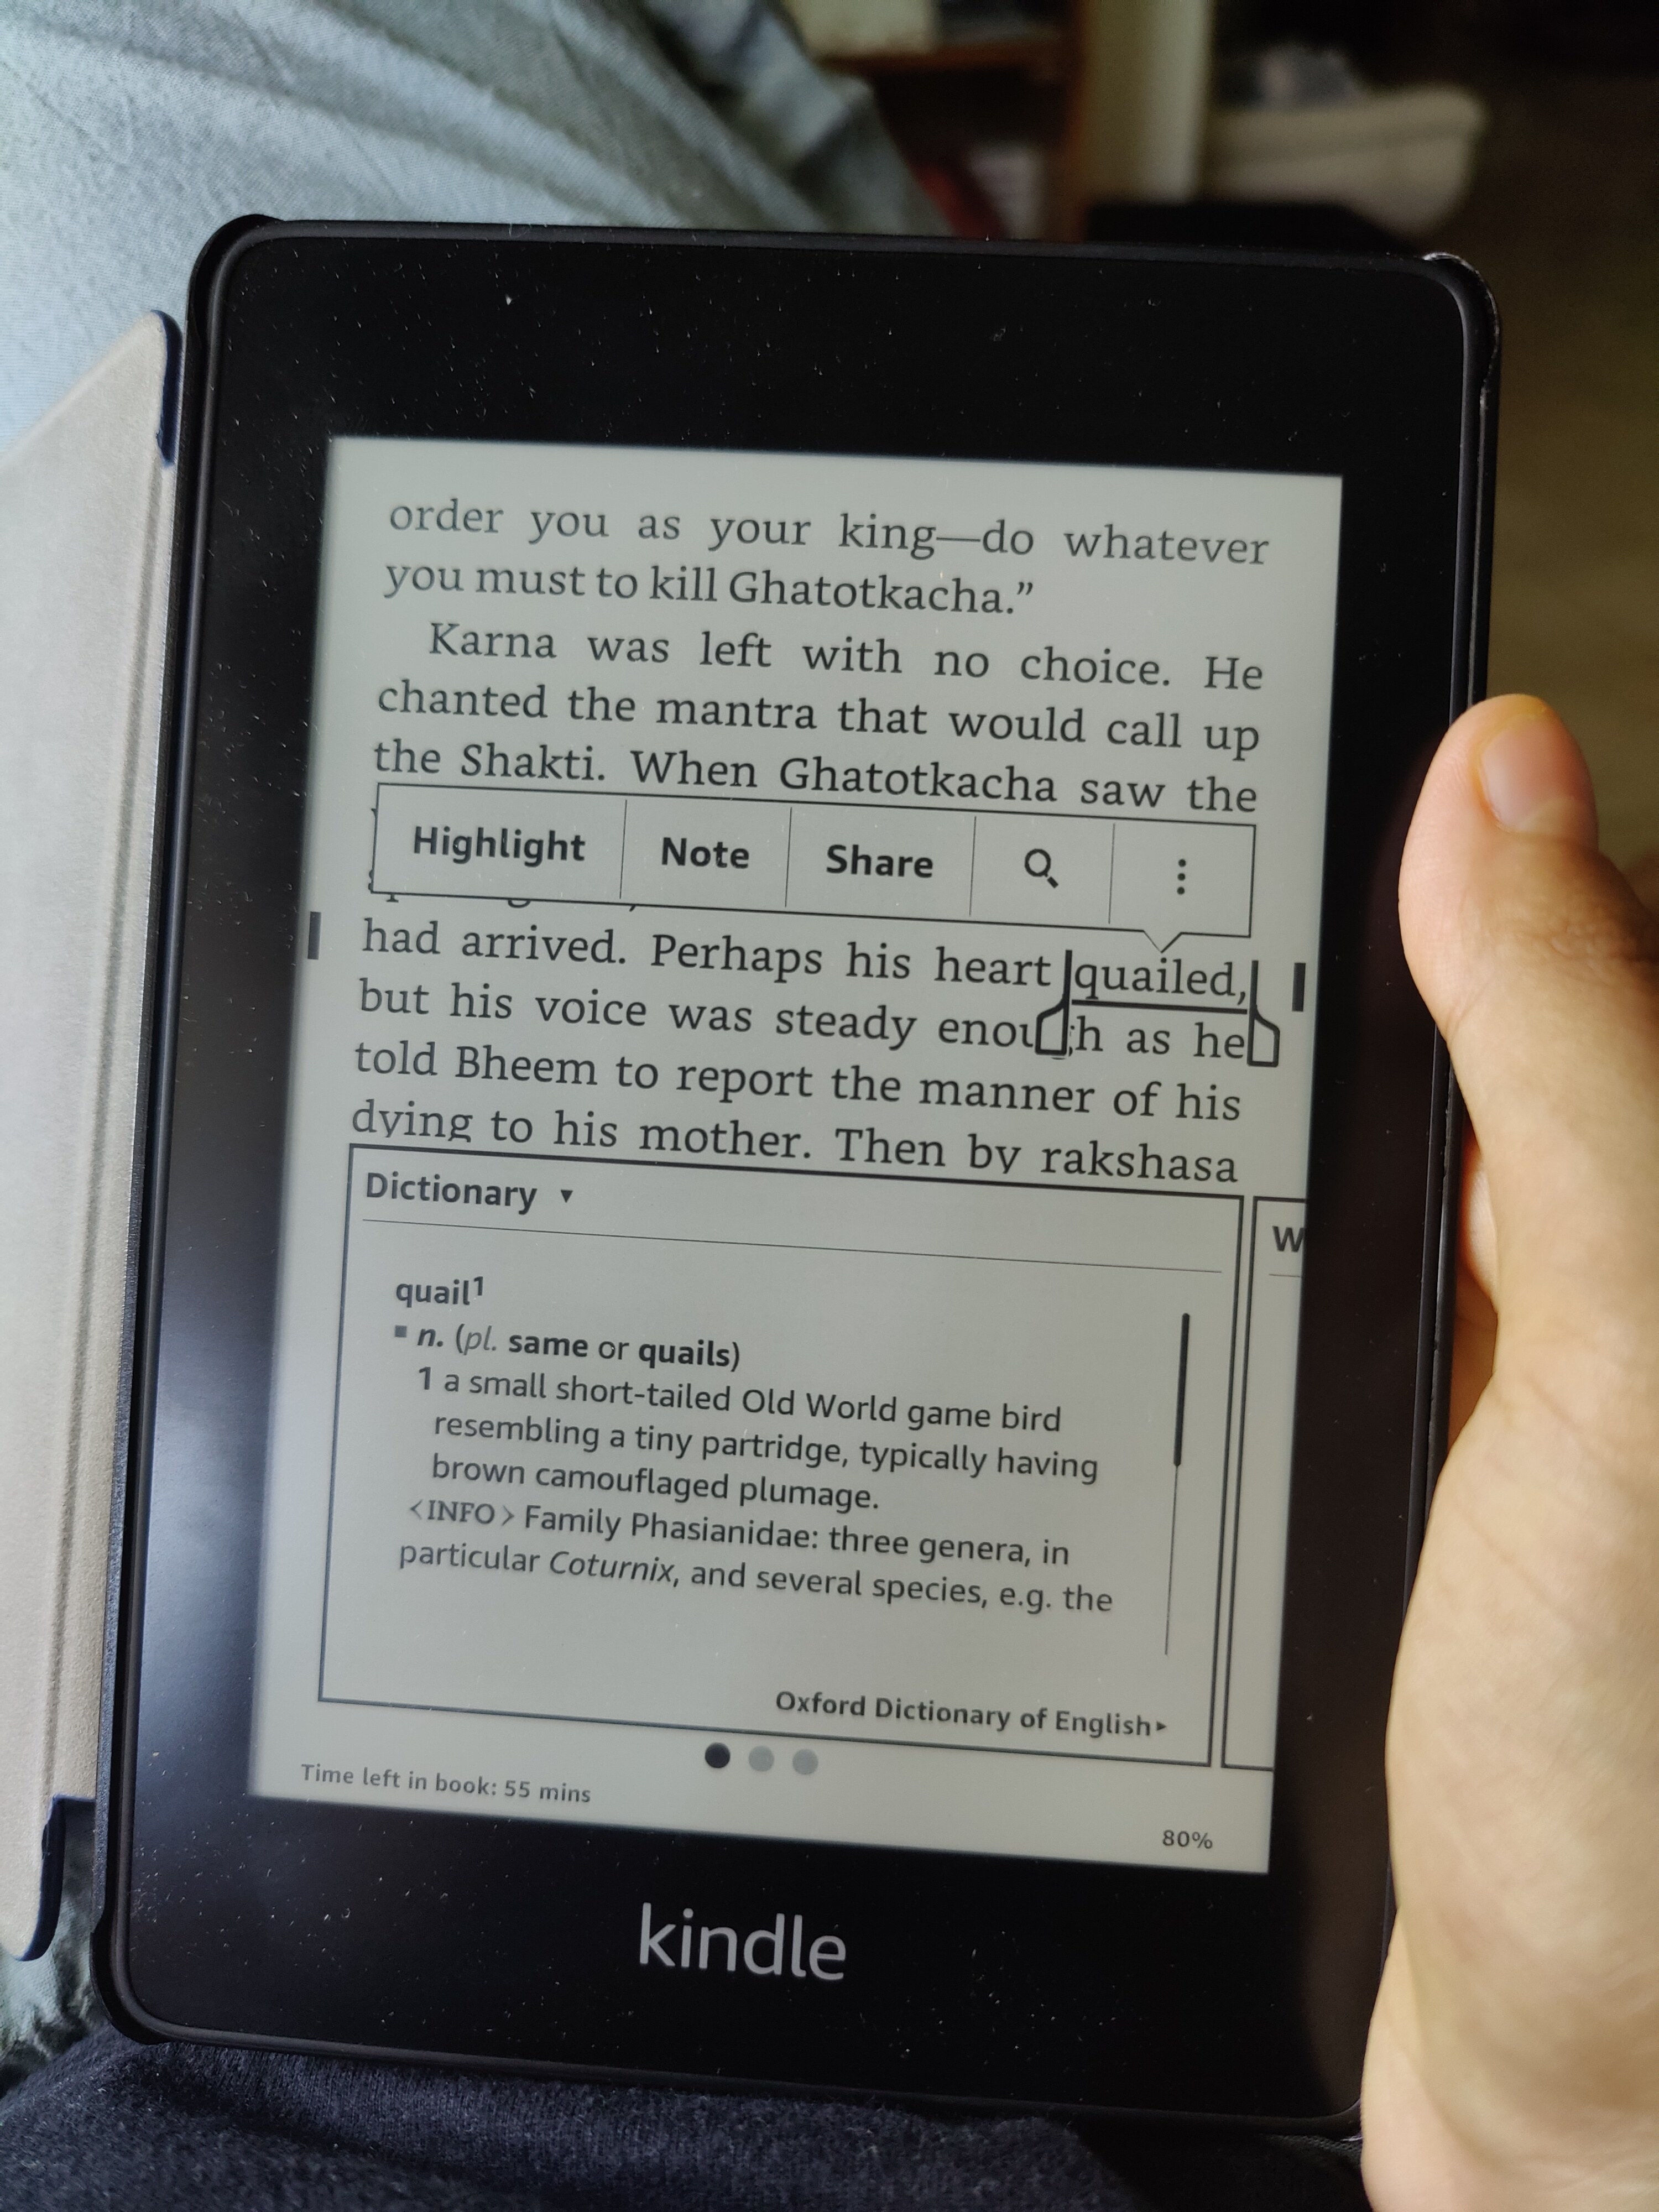 The word &#x27;quail&#x27; has been highlighted on the Kindle, and the inbuilt dictionary is displaying its meaning.